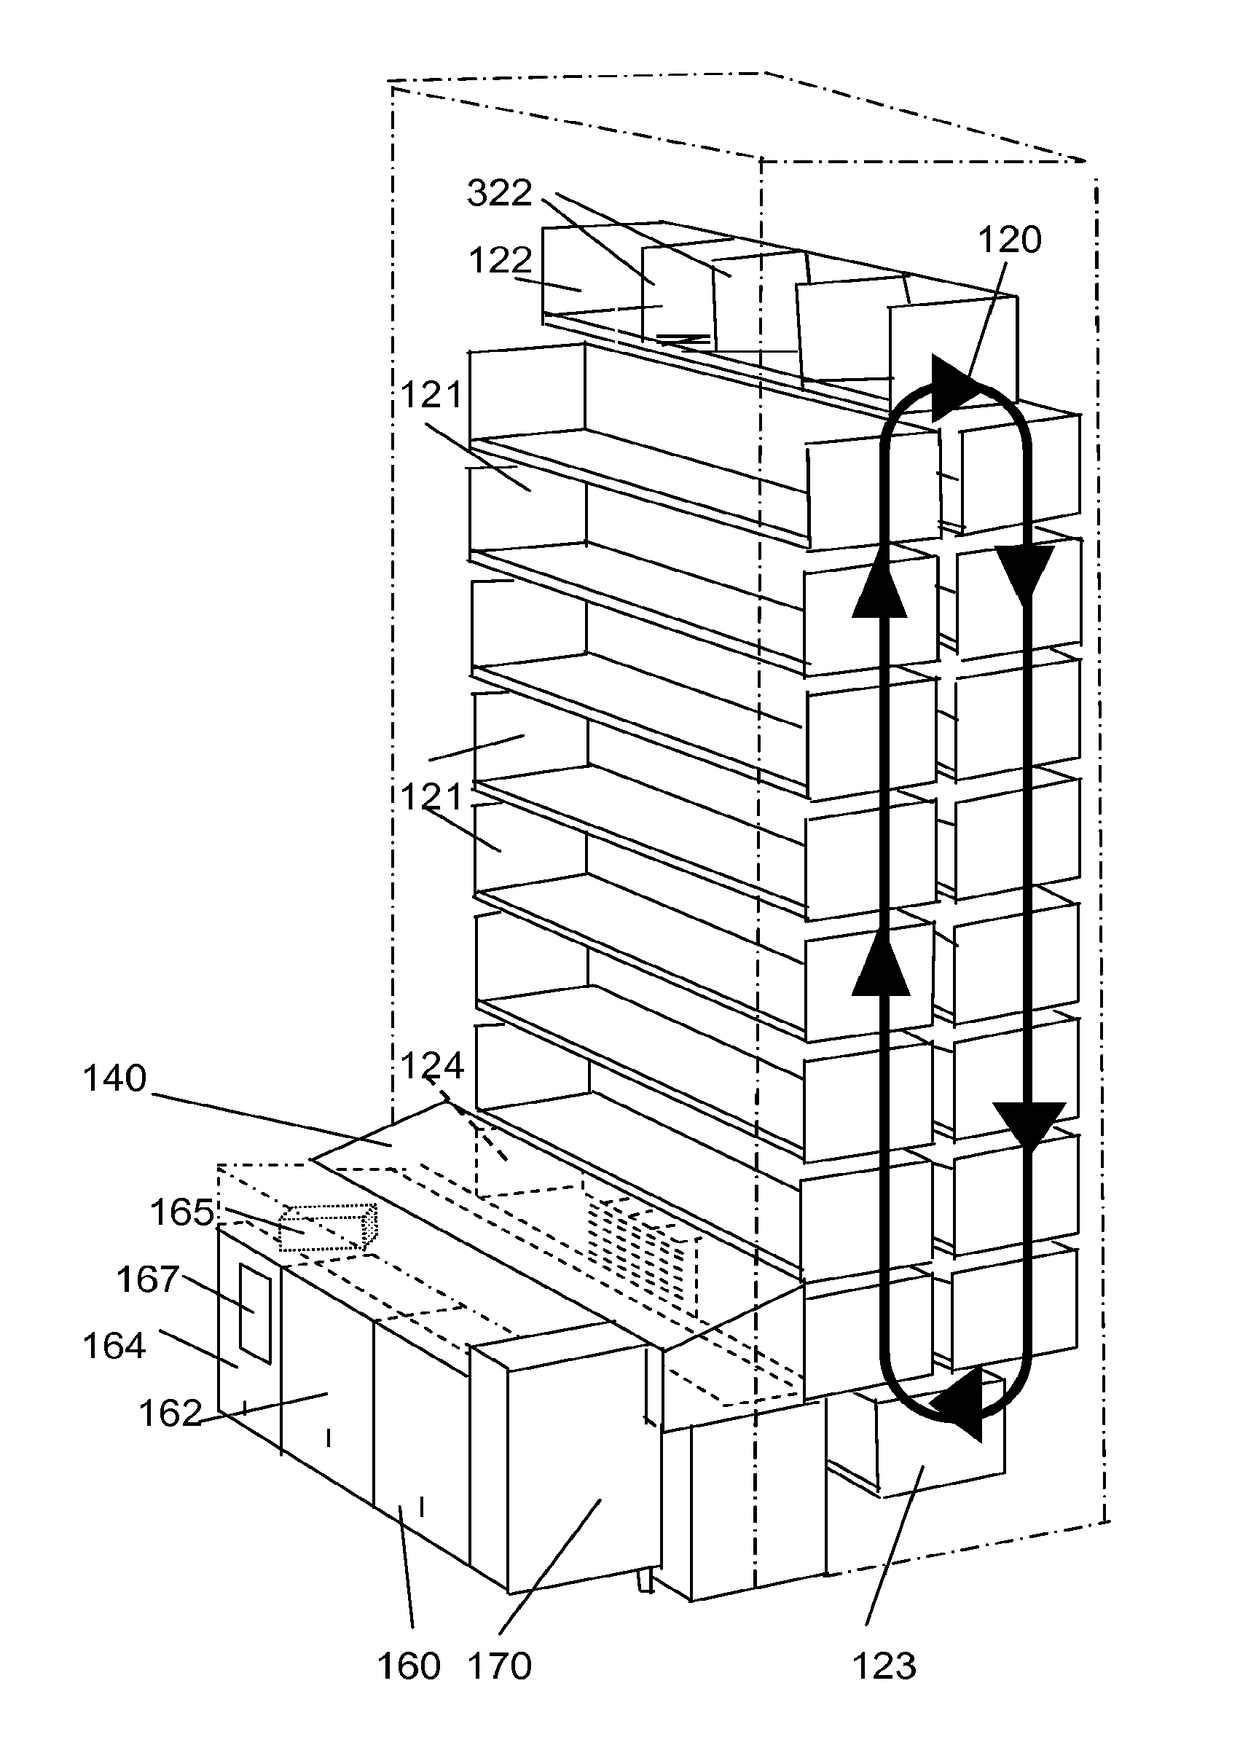 Automated system for storing, retrieving and managing samples